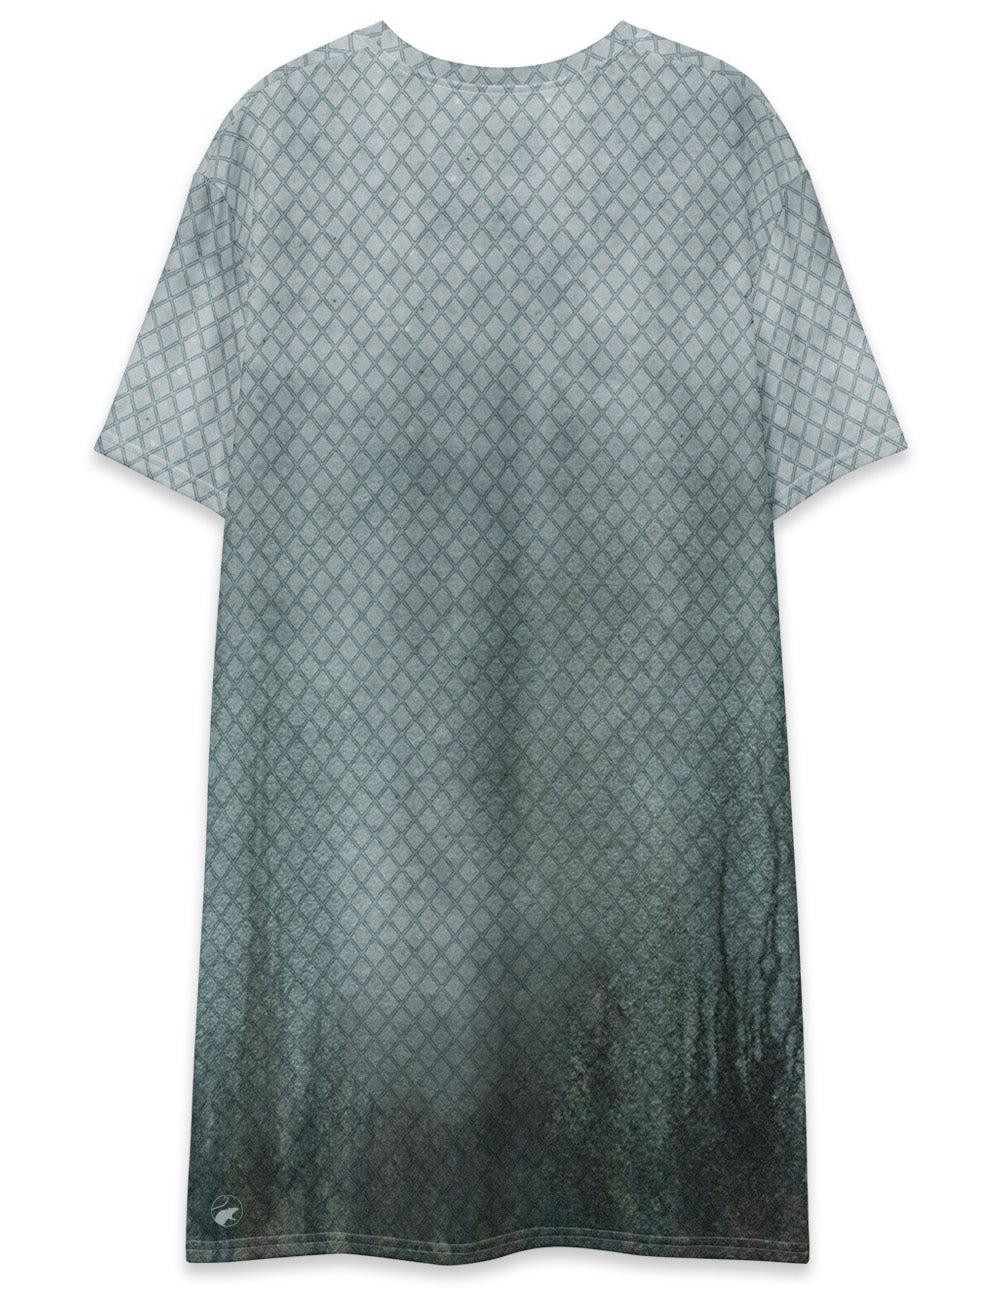 Hospital Gown T-Shirt Dress from "The Gown"